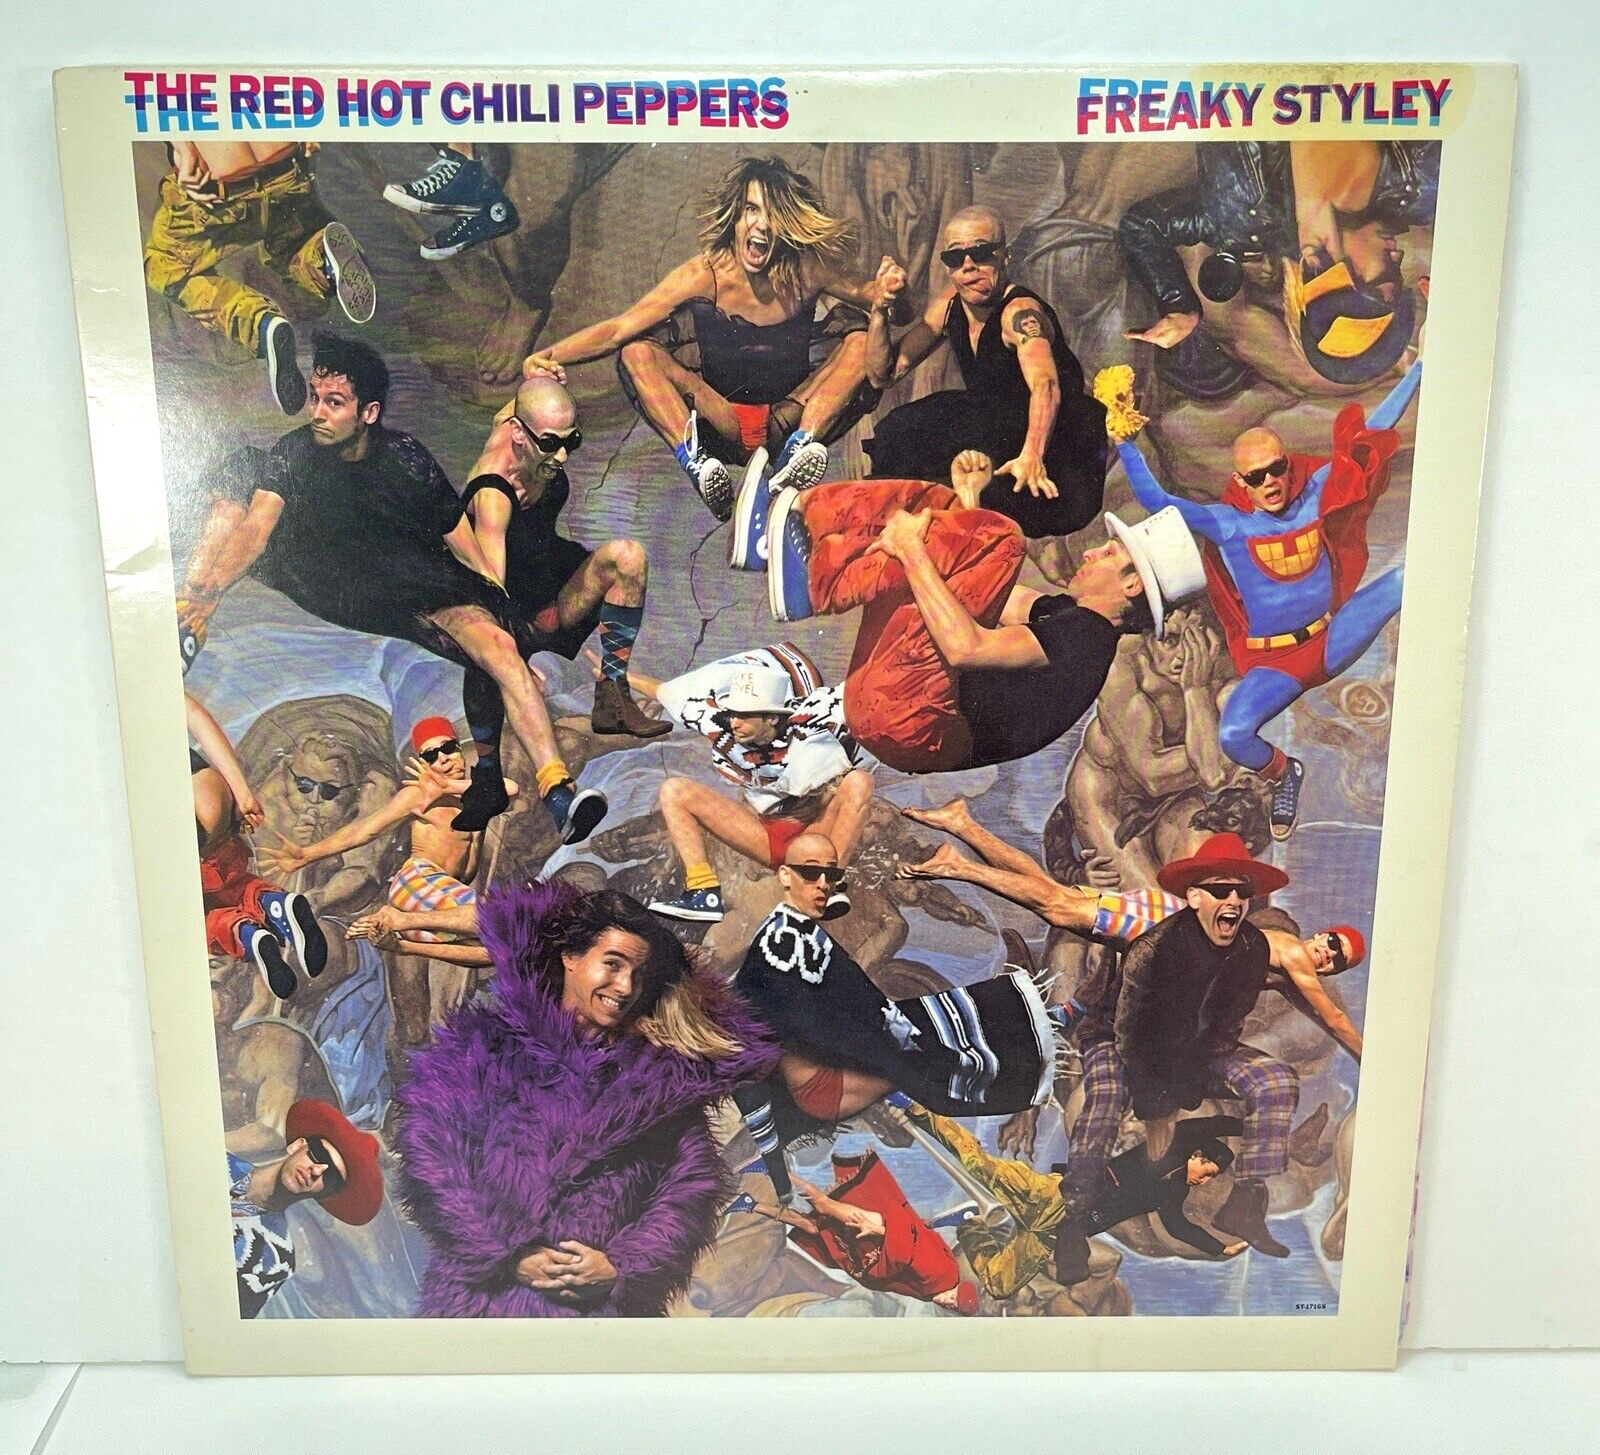 RED HOT CHILI PEPPERS - Freaky Styley (1985, EMI America/Enigma w/inner) VG/VG